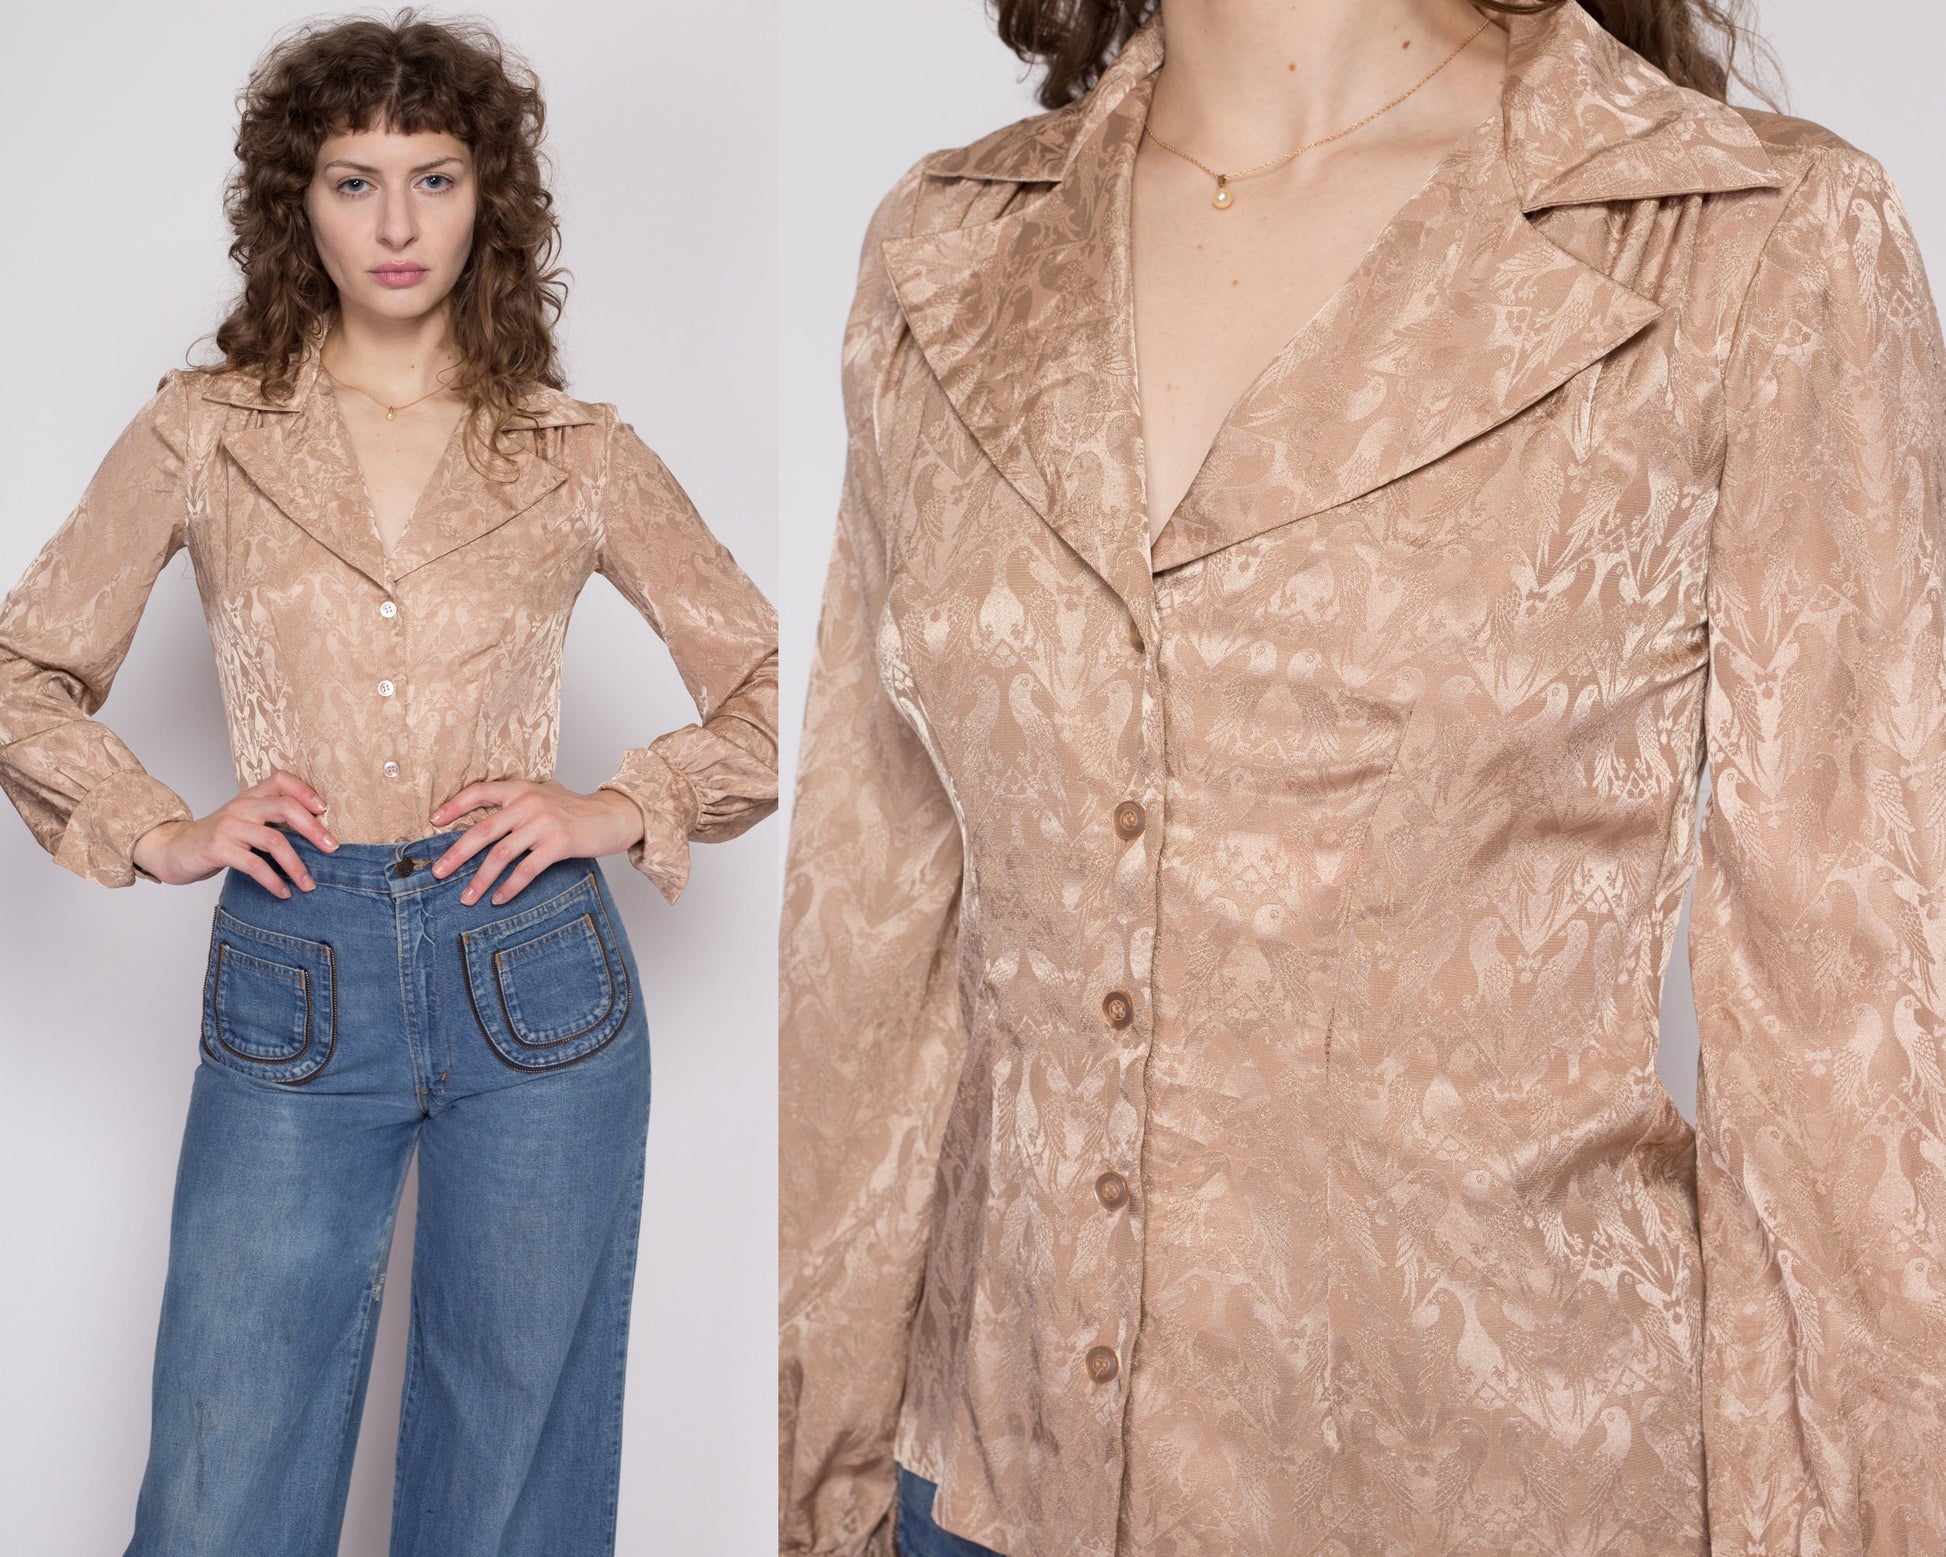 Sm-Med 70s Dove Print Satin Blouse Petite | Vintage Notched Collar Button Up Long Sleeved Top